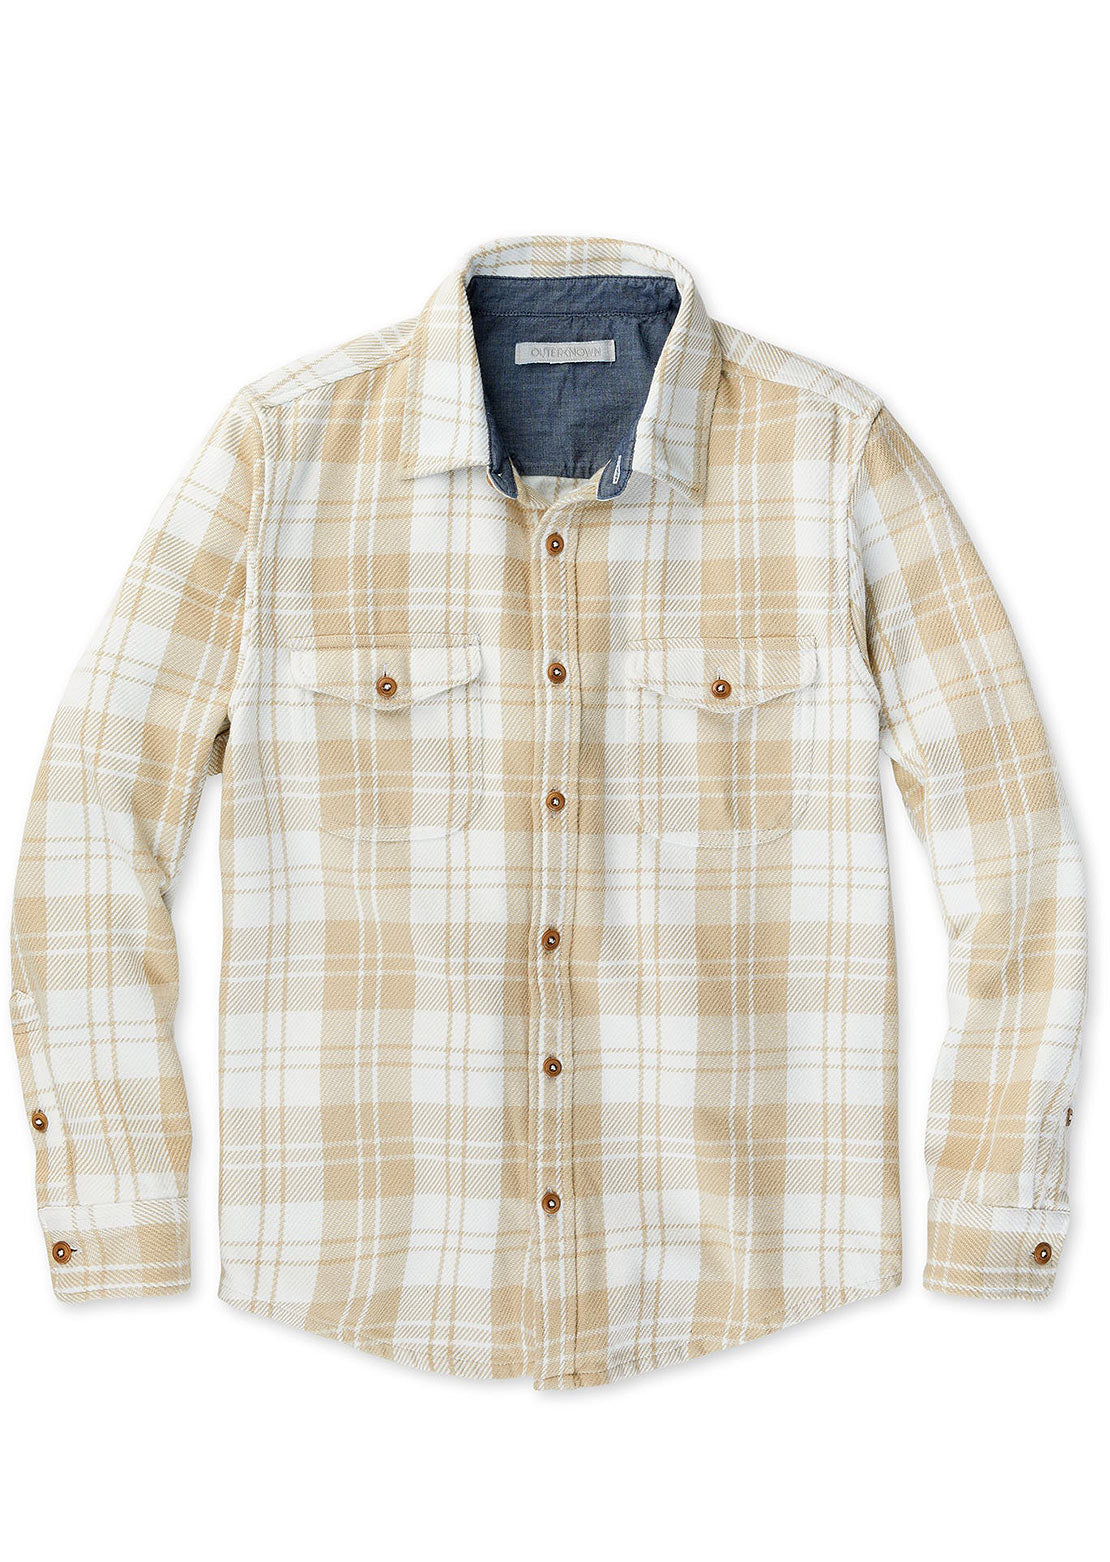 Outerknown Men's Blanket Button Up Shirt - PRFO Sports